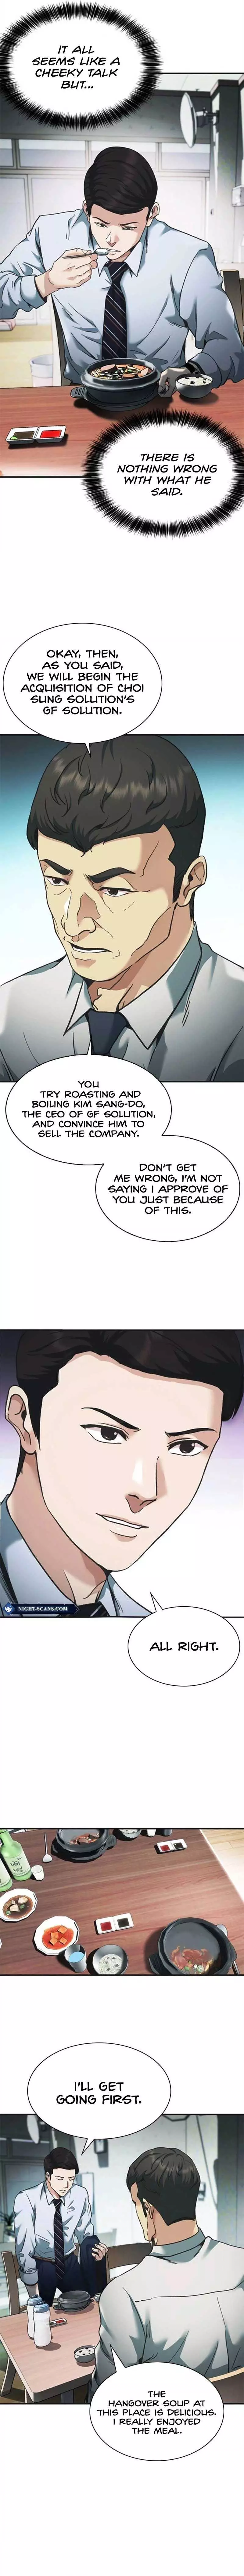 Chairman Kang, The New Employee - 29 page 7-a2e7c088